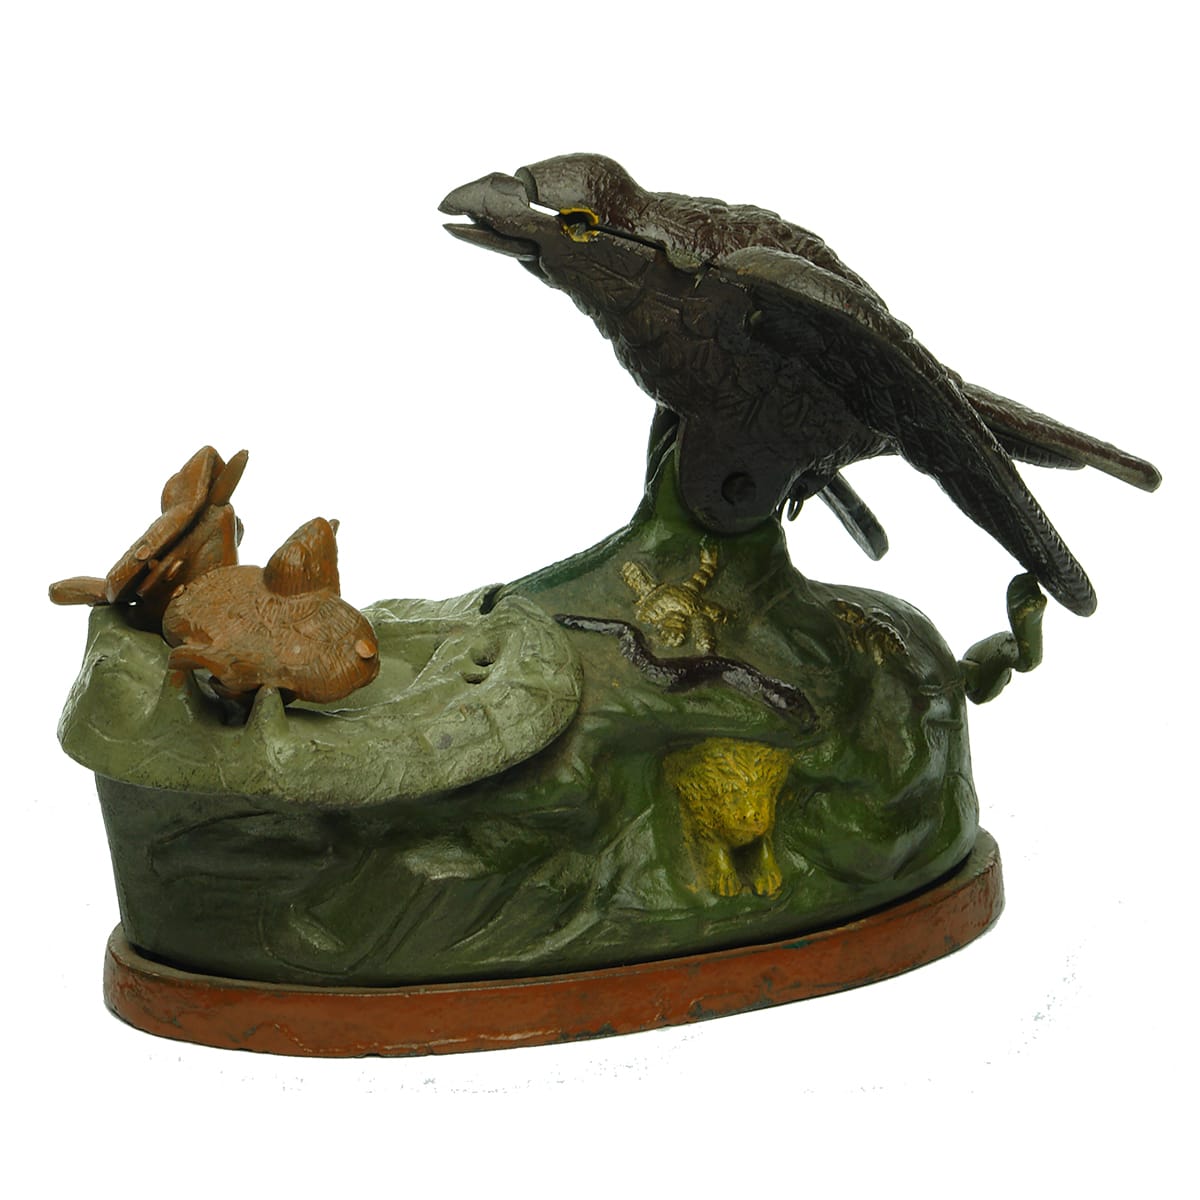 Money Box. Eagle & Eaglets, J & E Stevens, Cromwell, CT, USA.  Patented by Charles M Henn of Chicago ILL, January 23, 1883.